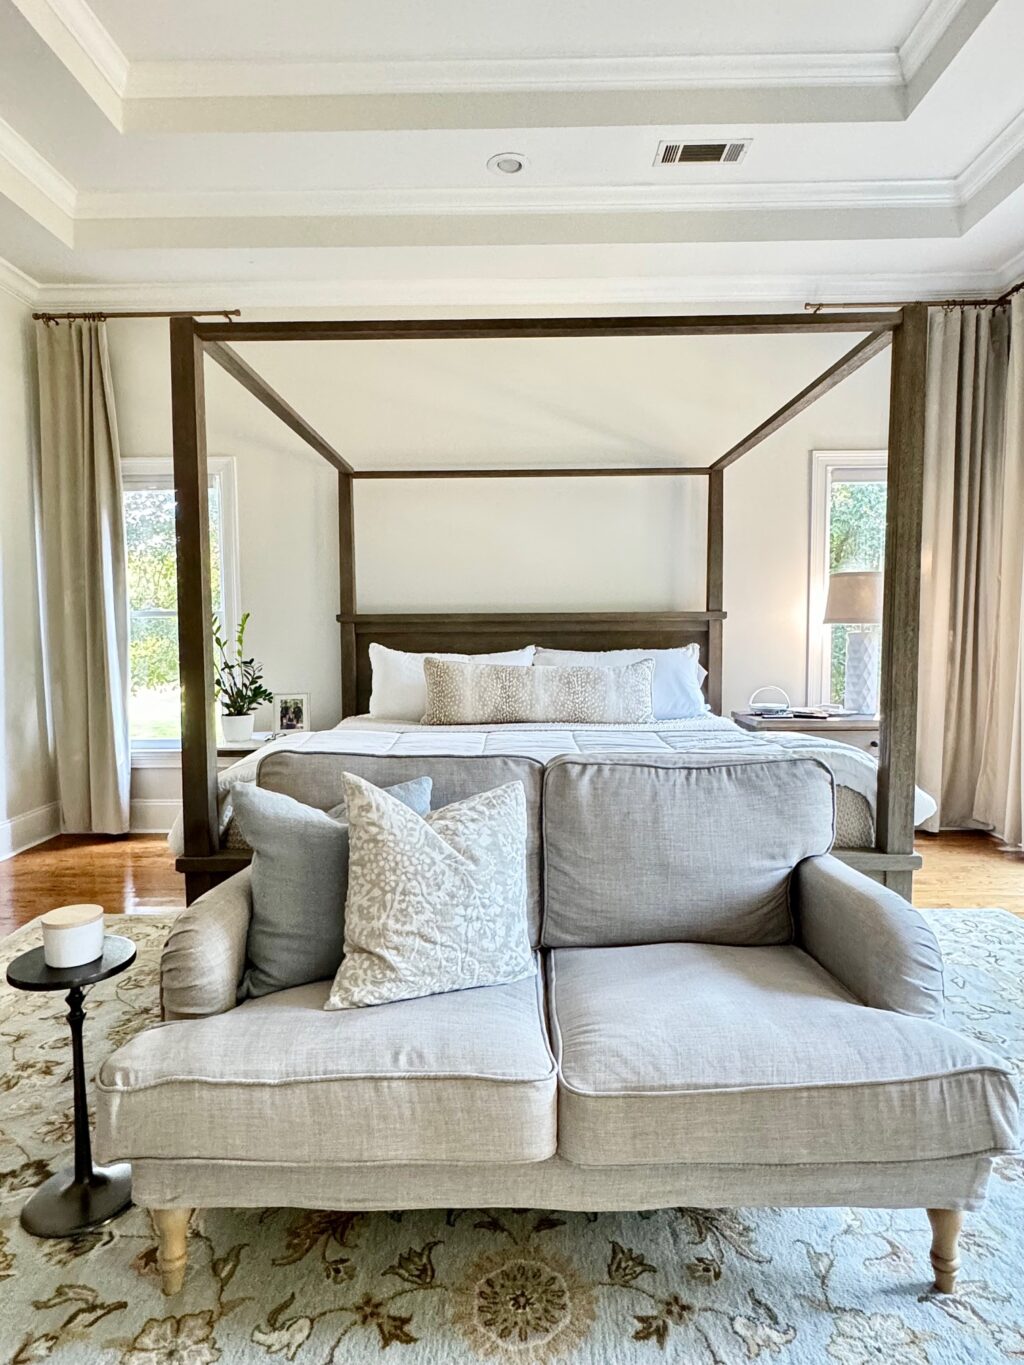 small loveseat in front of canopy bed